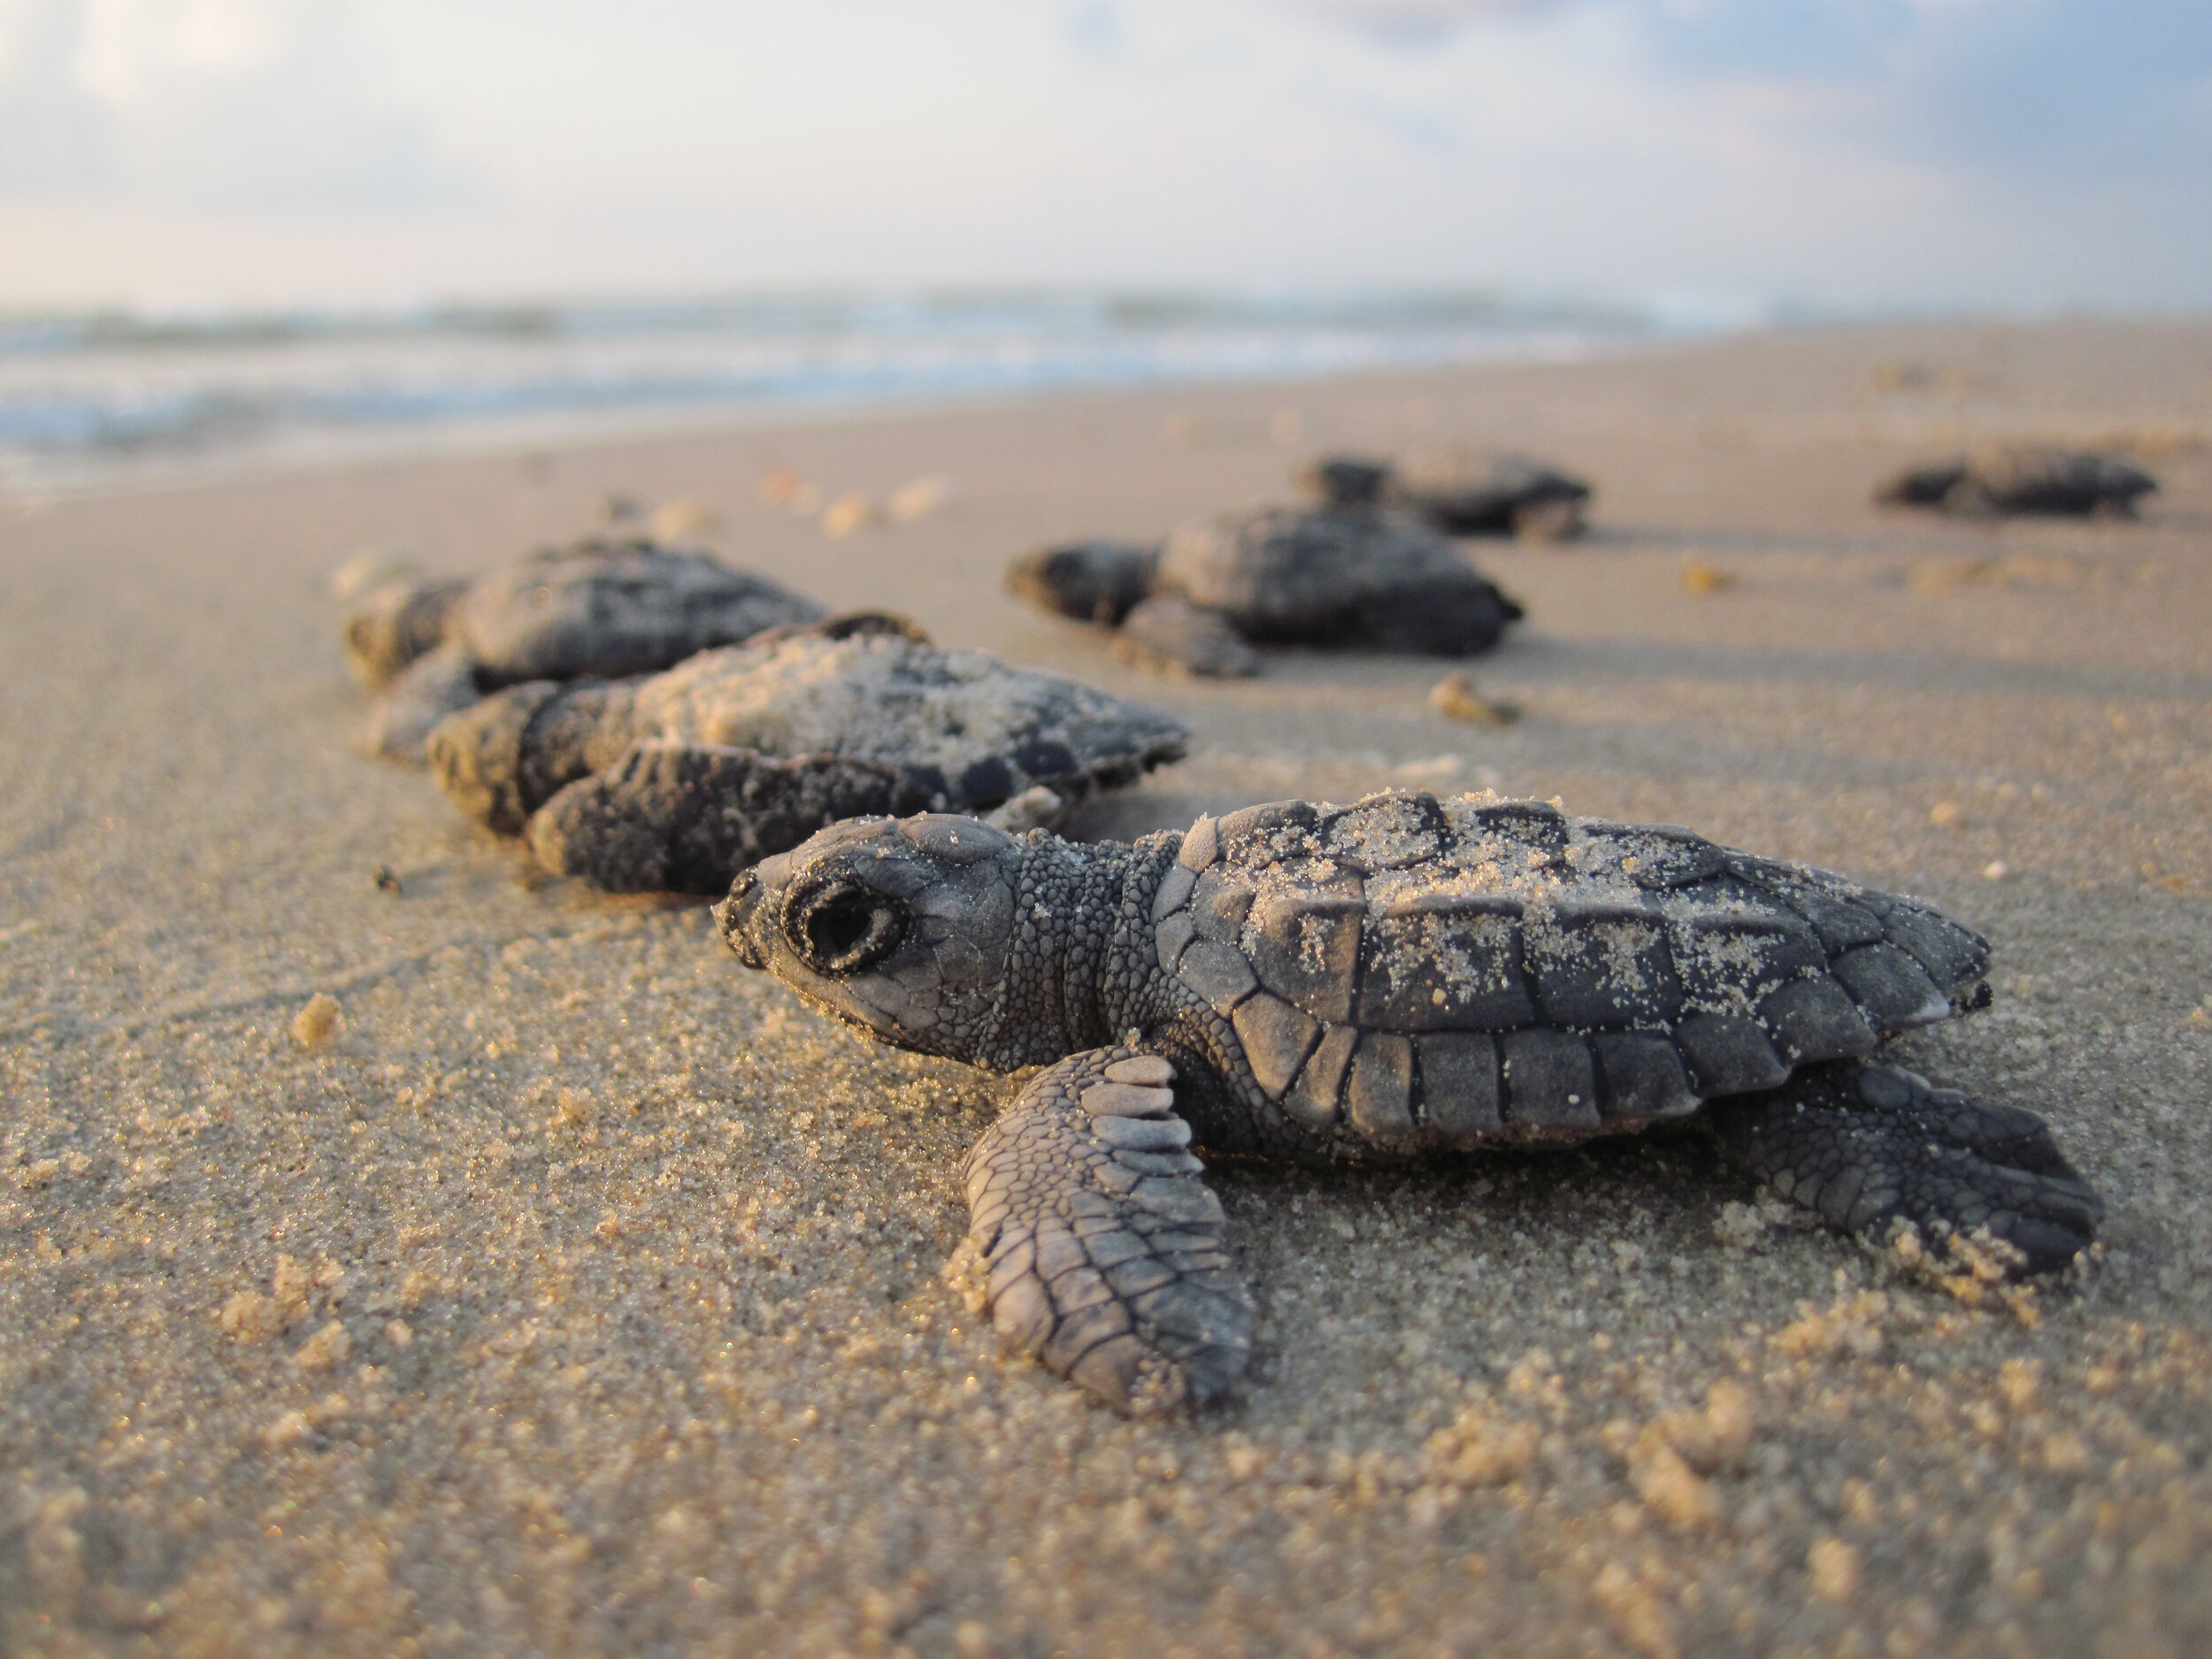  Hatchling Kemp’s ridley turtles head to sea in Texas. © NPS Photo 